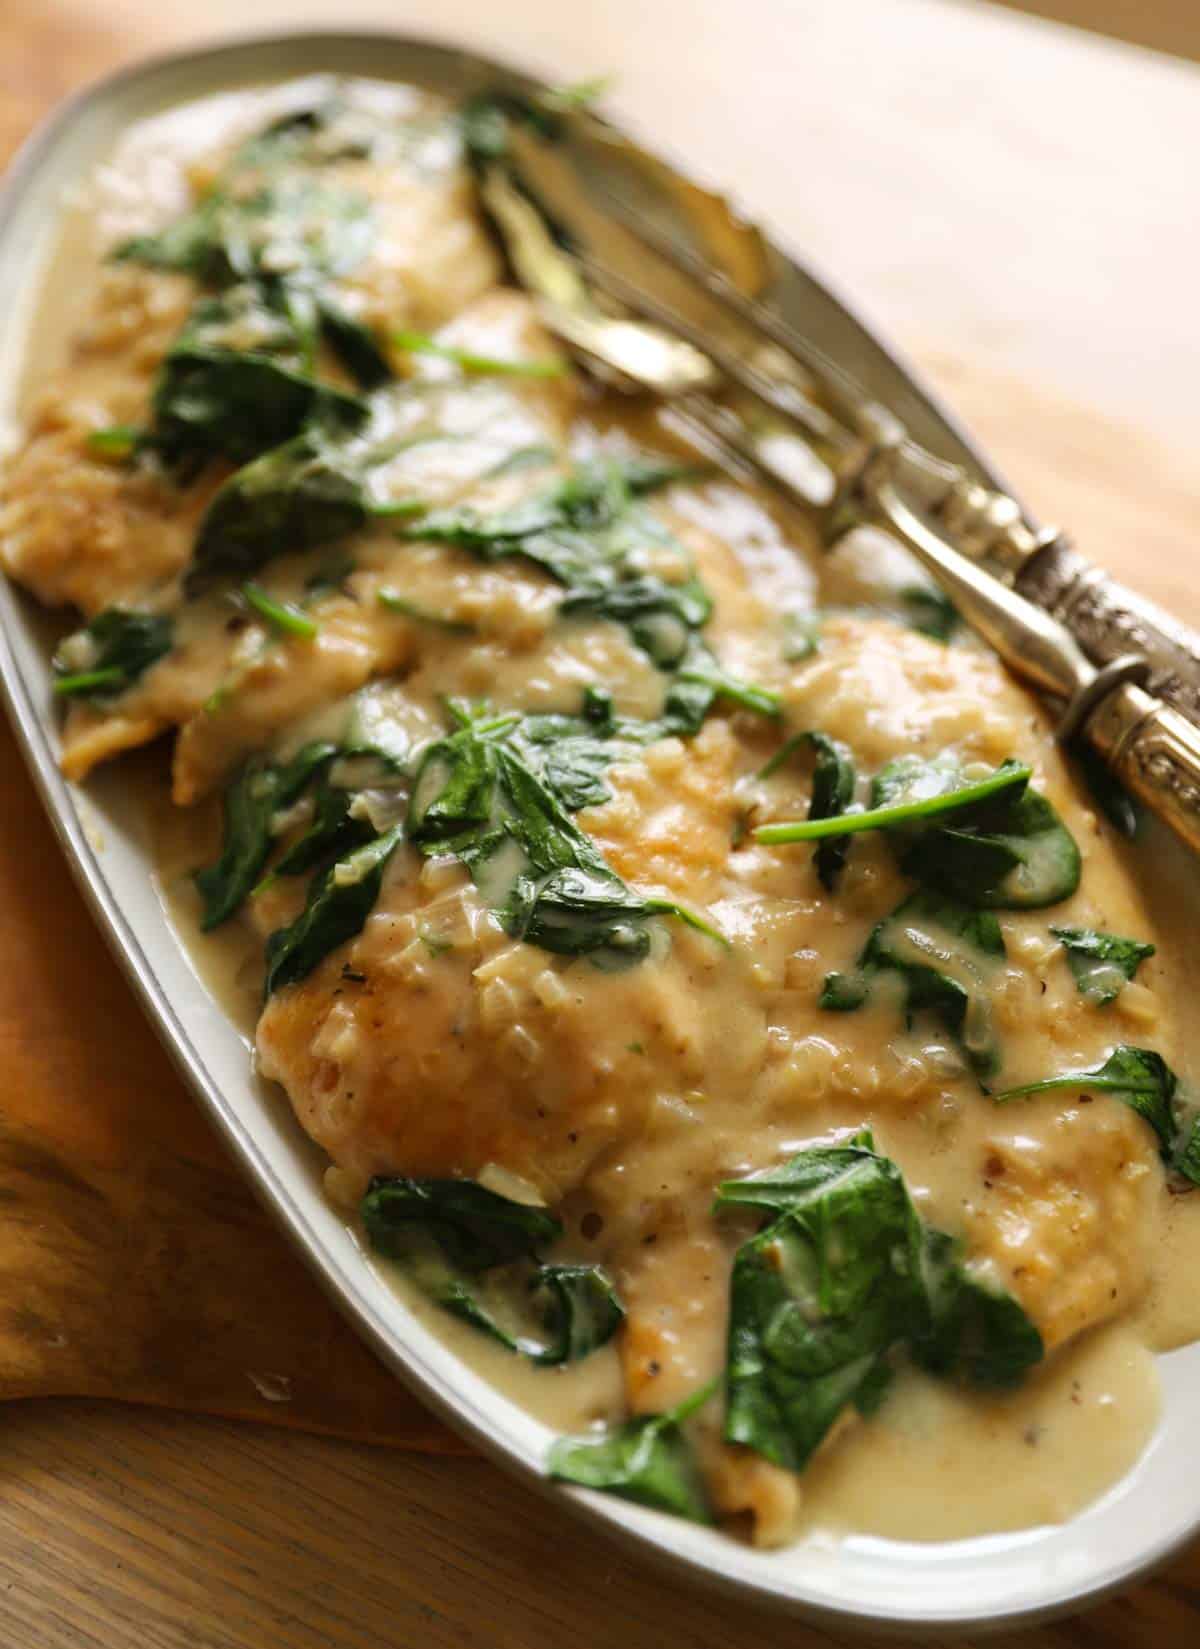 A platter of seared chicken in a creamy sauce with wilted spinach